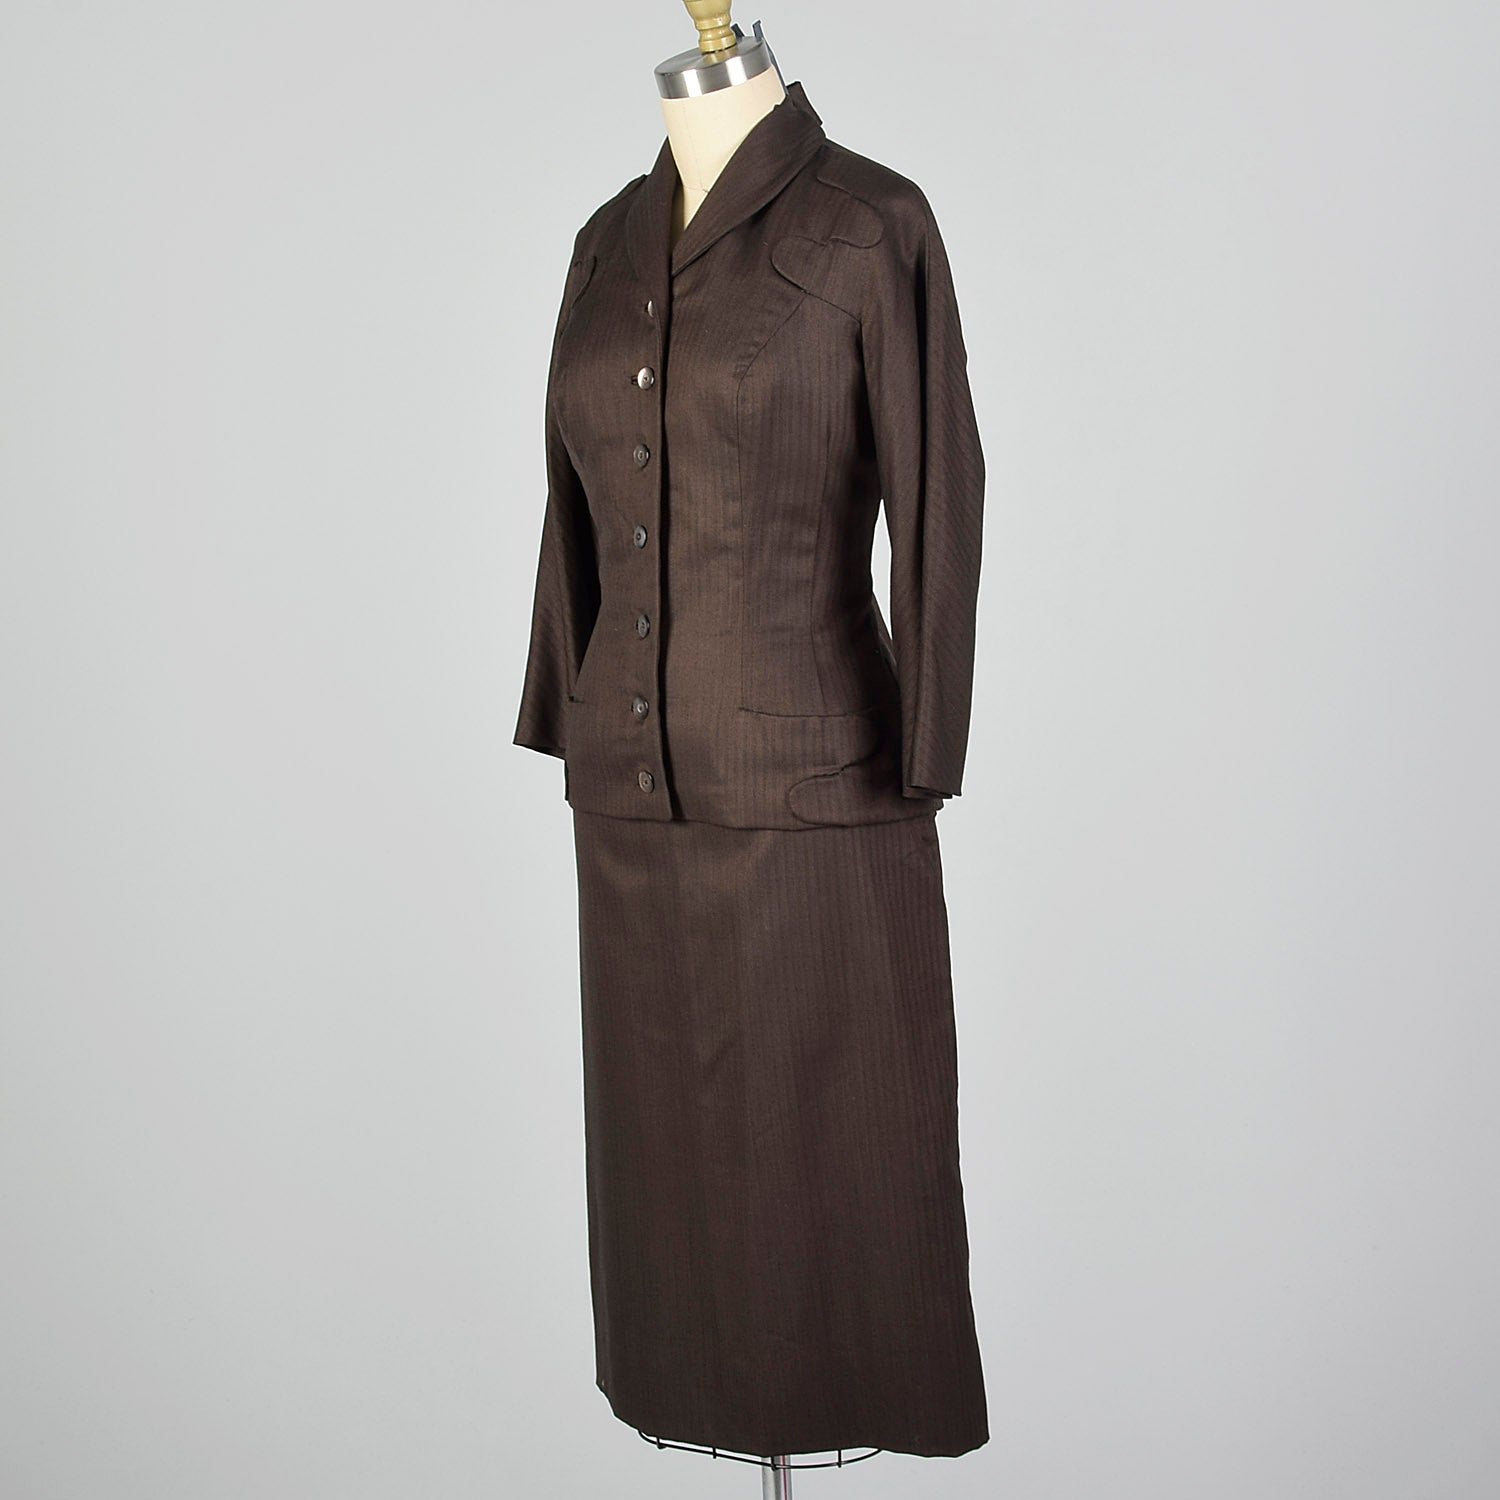 1950s Brown Two Piece Skirt Suit with Pockets